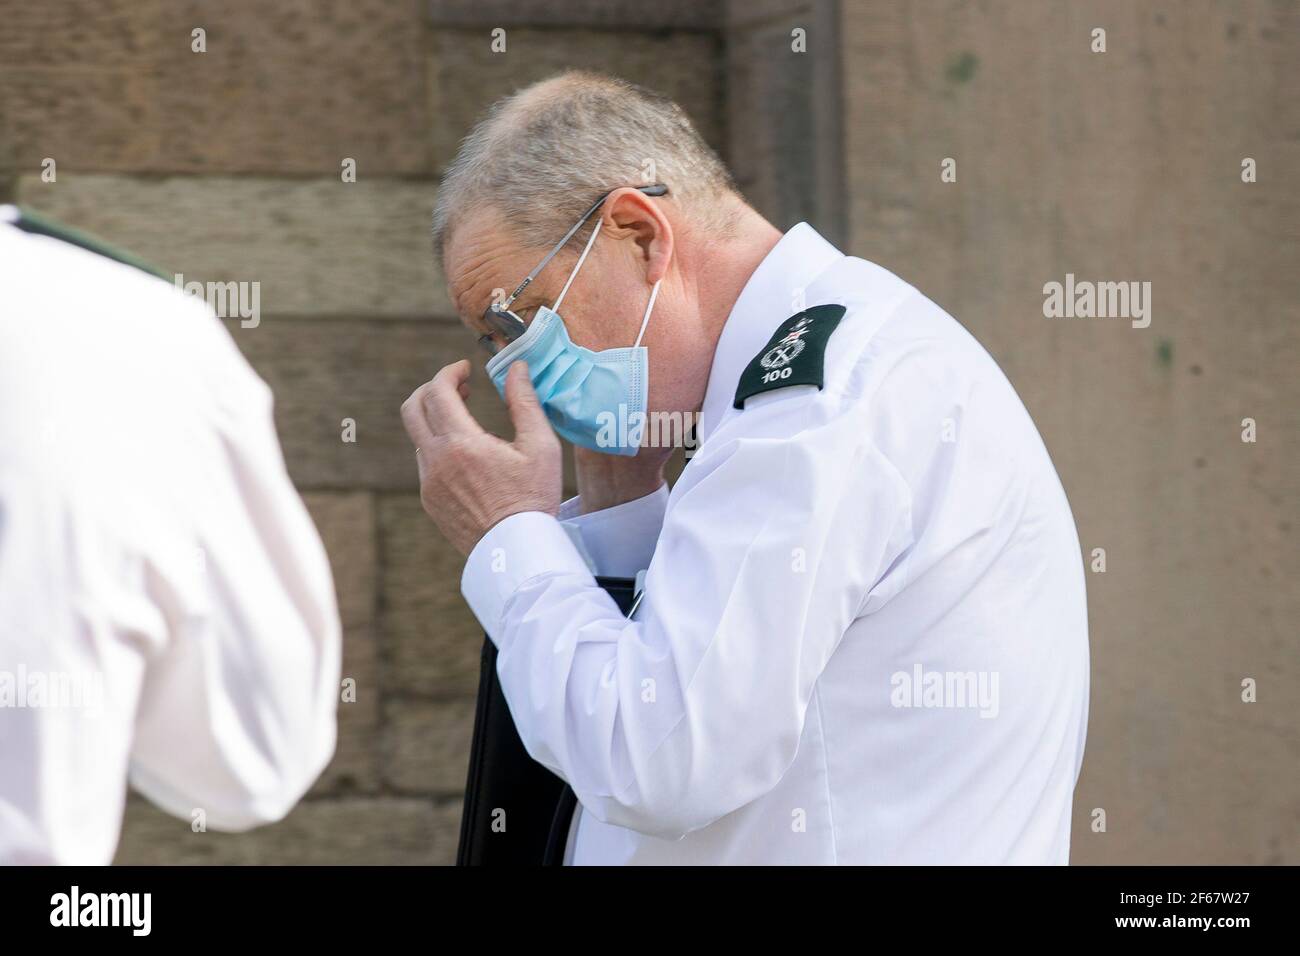 RETRANSMITTING AMENDING THE NAME BRYNE TO BYRNE. PSNI Chief Constable Simon Byrne putting on his face mask after giving reaction to the findings that the Public Prosecution Service (PPS) has not recommended prosecution for anyone concerned in relation to the funeral of prominent Irish Republican Bobby Storey in west Belfast on 30 June 2020. The funeral attracted 2,000 mourners at a time when only 30 people were permitted at public gatherings. Stock Photo